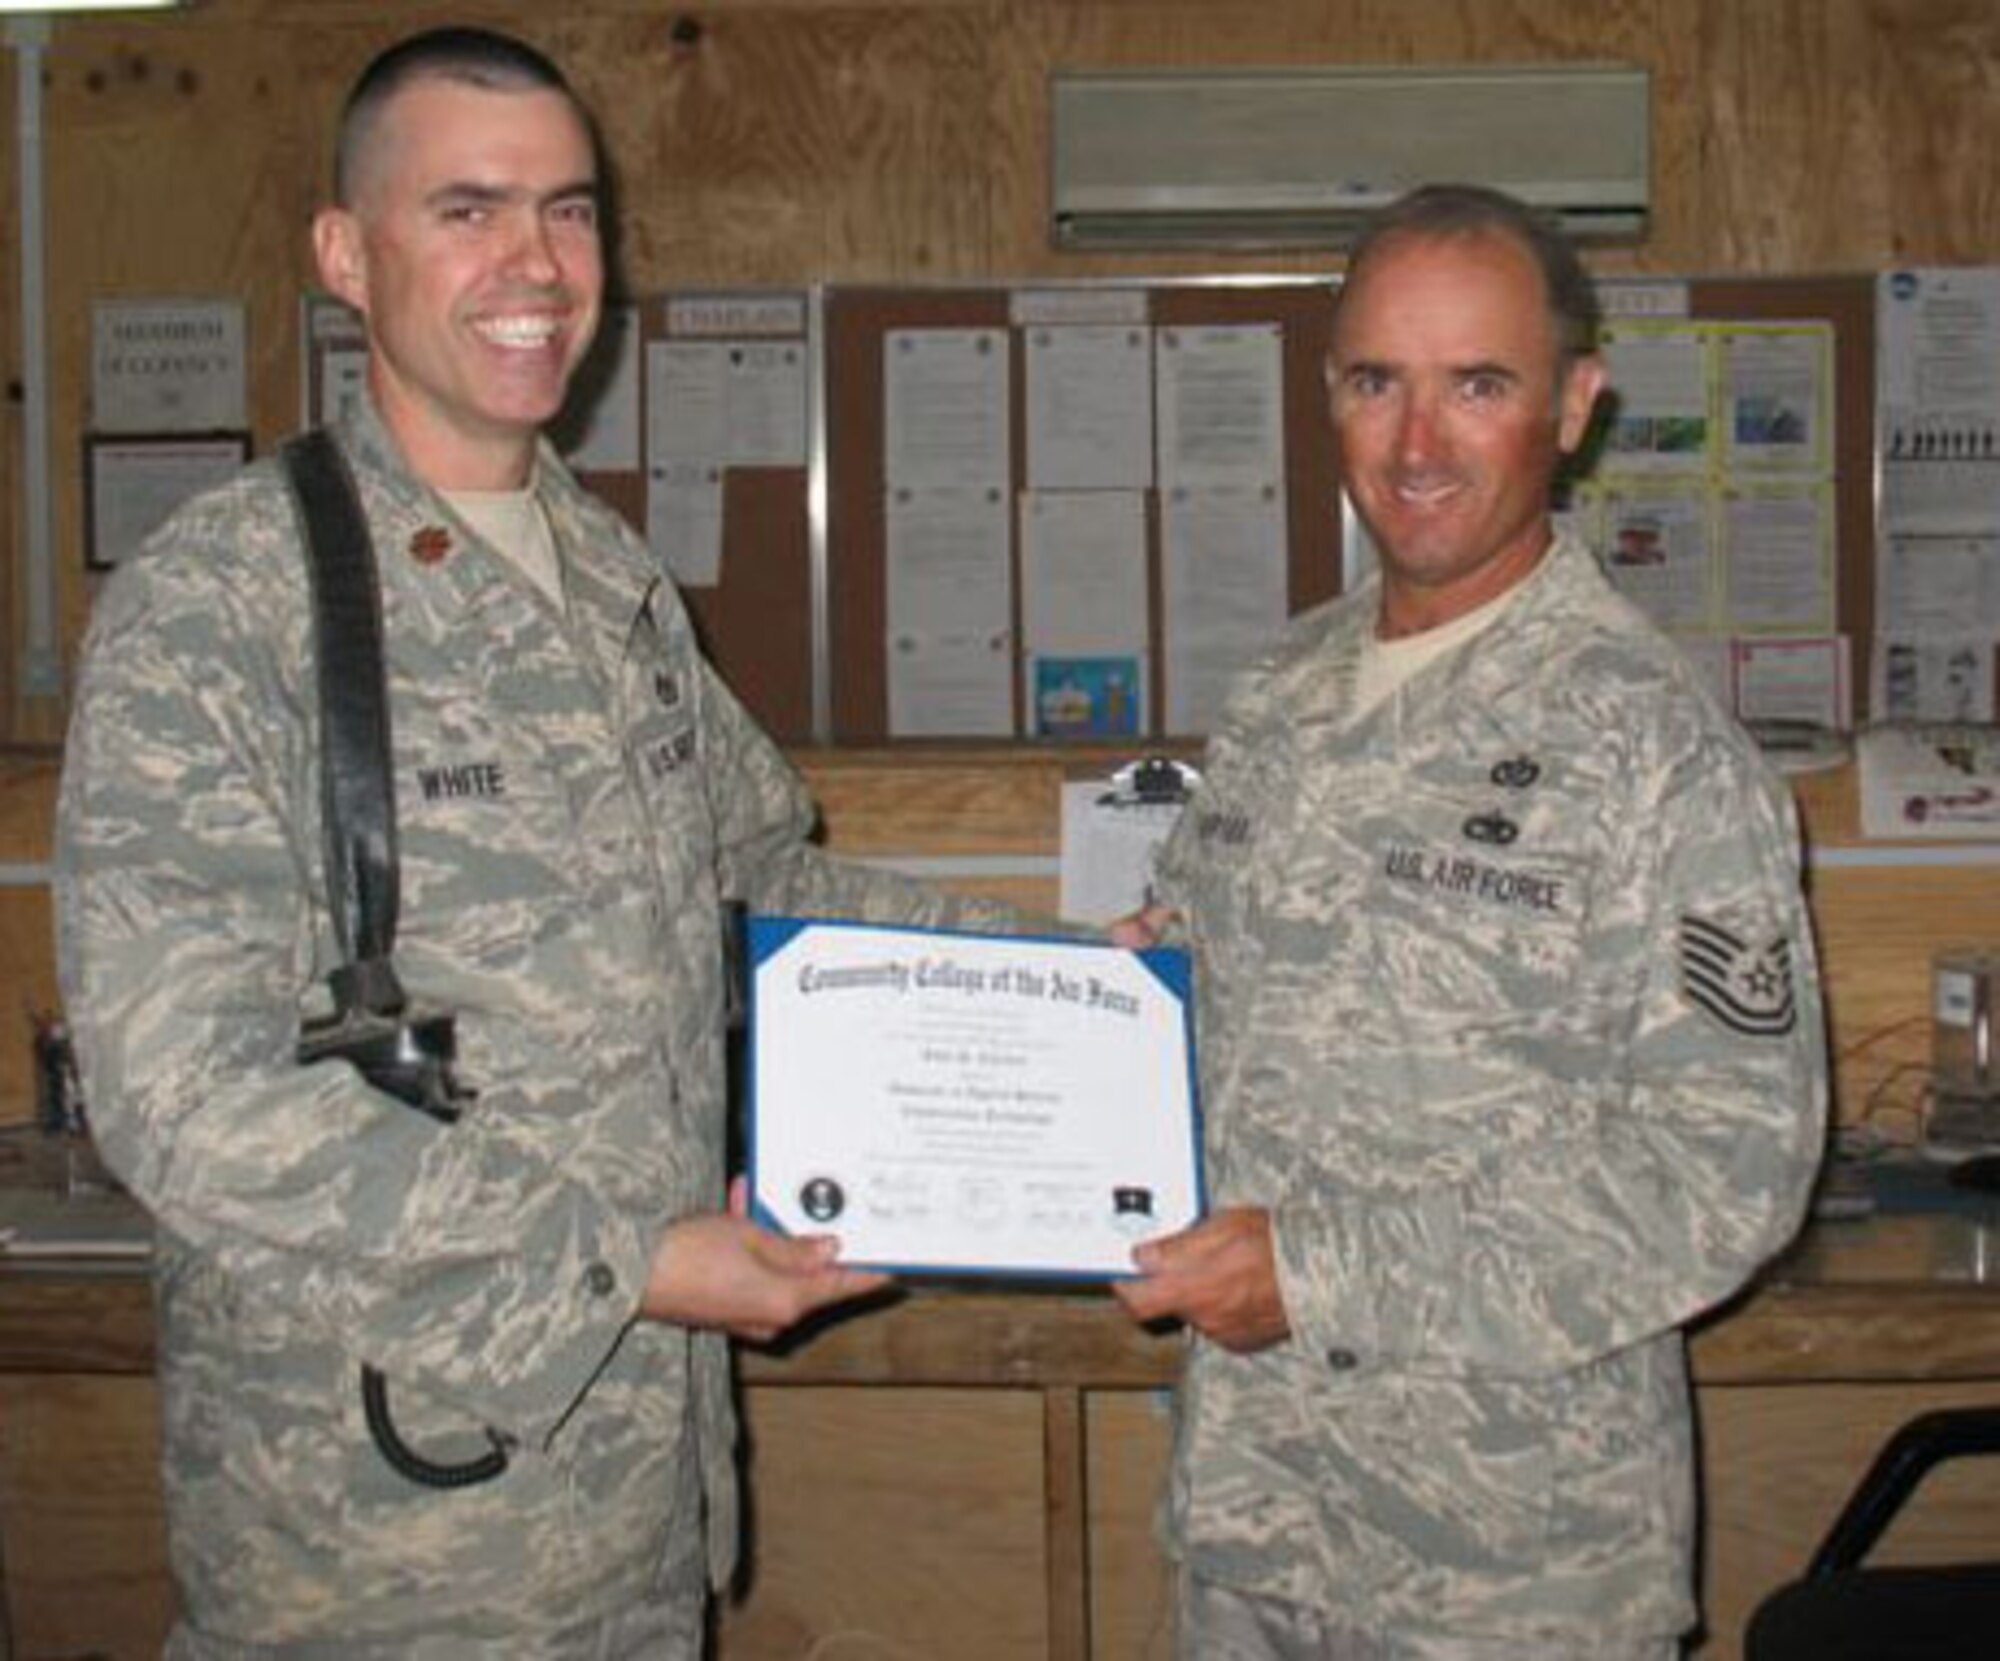 SEYMOUR JOHNSON AIR FORCE BASE, N.C. -- Tech. Sgt. John Chartier (right) receives is Community College of the Air Force degree while stationed at Camp Speicher, Iraq. Sergeant Chartier is a Reservist with the 916th Civil Engineer Squadron and works as a pavement and heavy equipment apprentice.